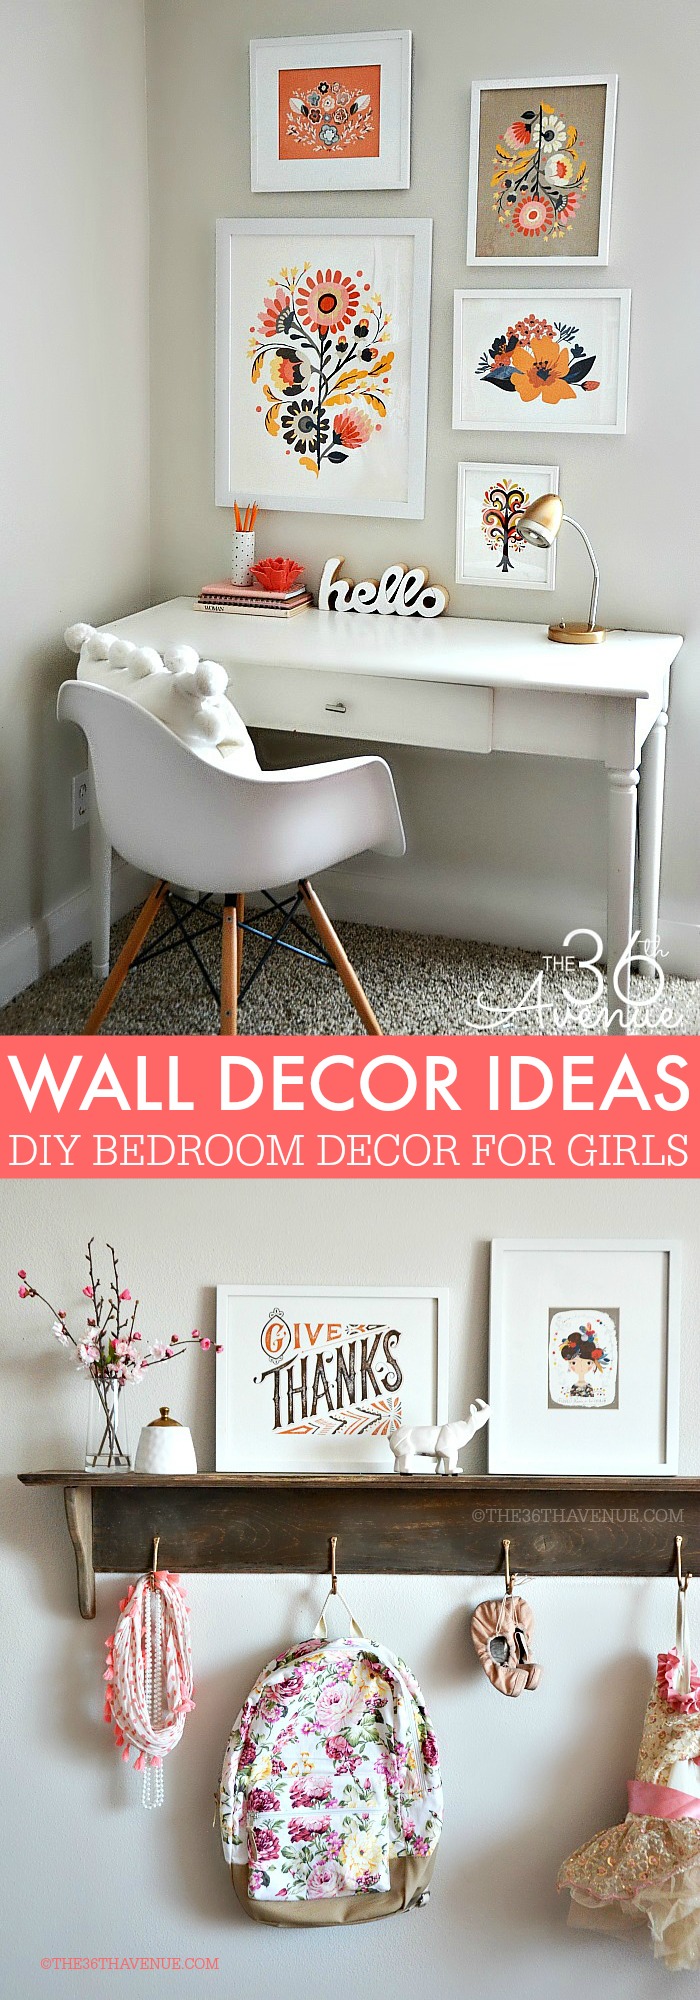 Home Decor - Wall Decor Ideas at the36thavenue.com Pin it now and decorate later!